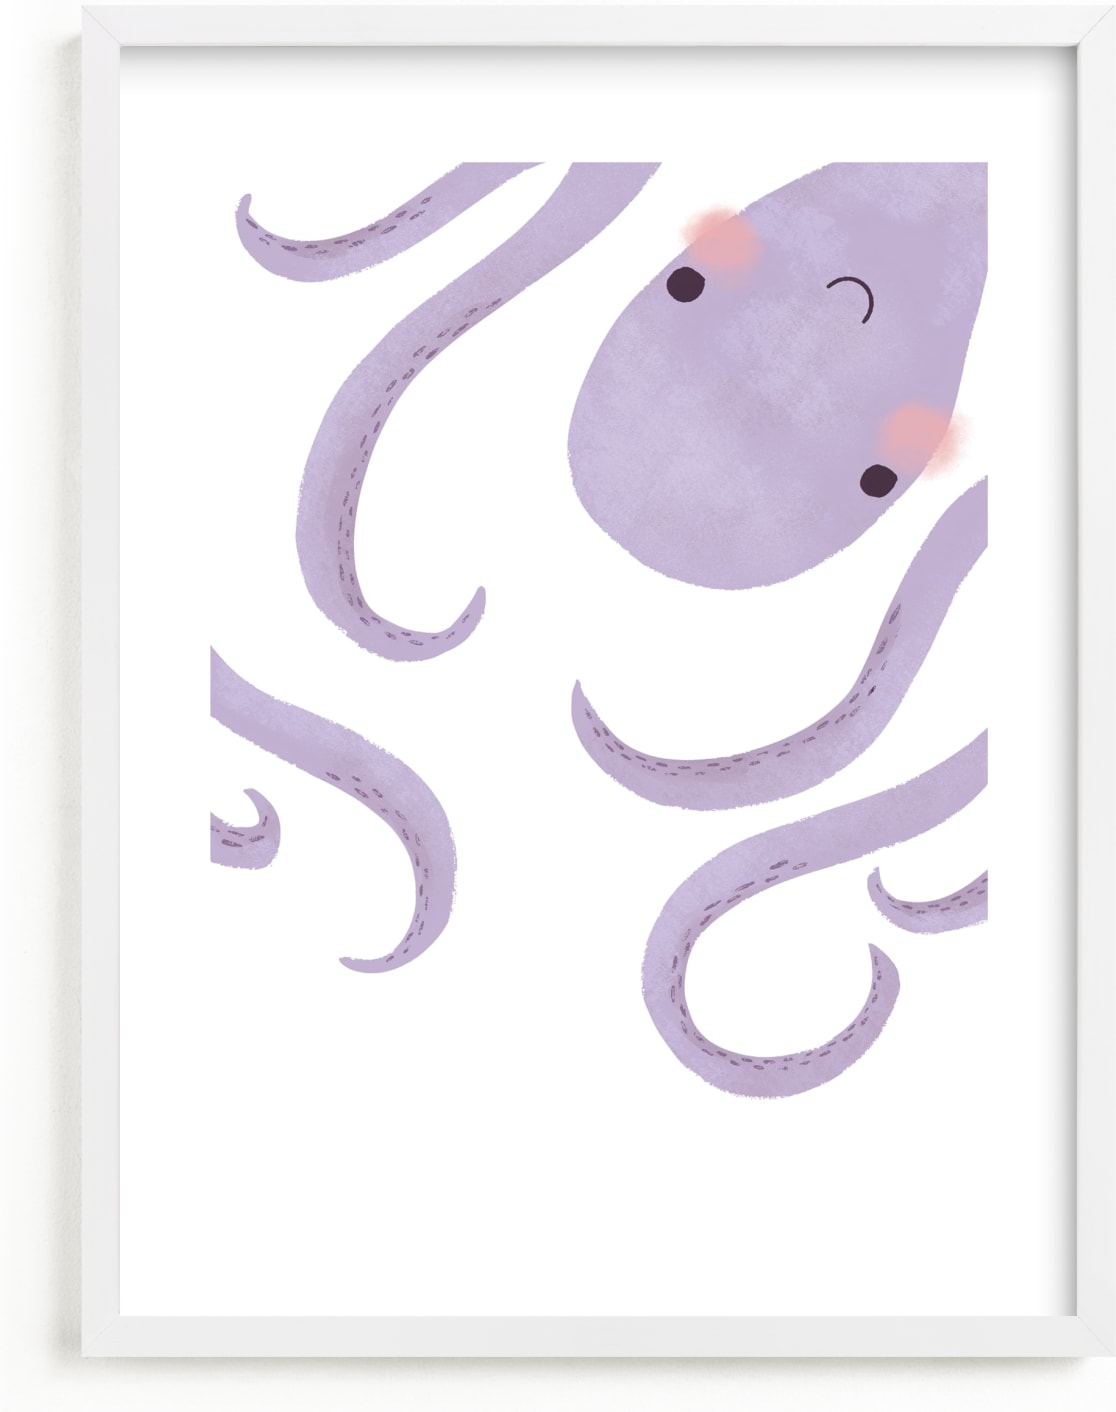 This is a purple art by Jackie Crawford called Little Septopus.